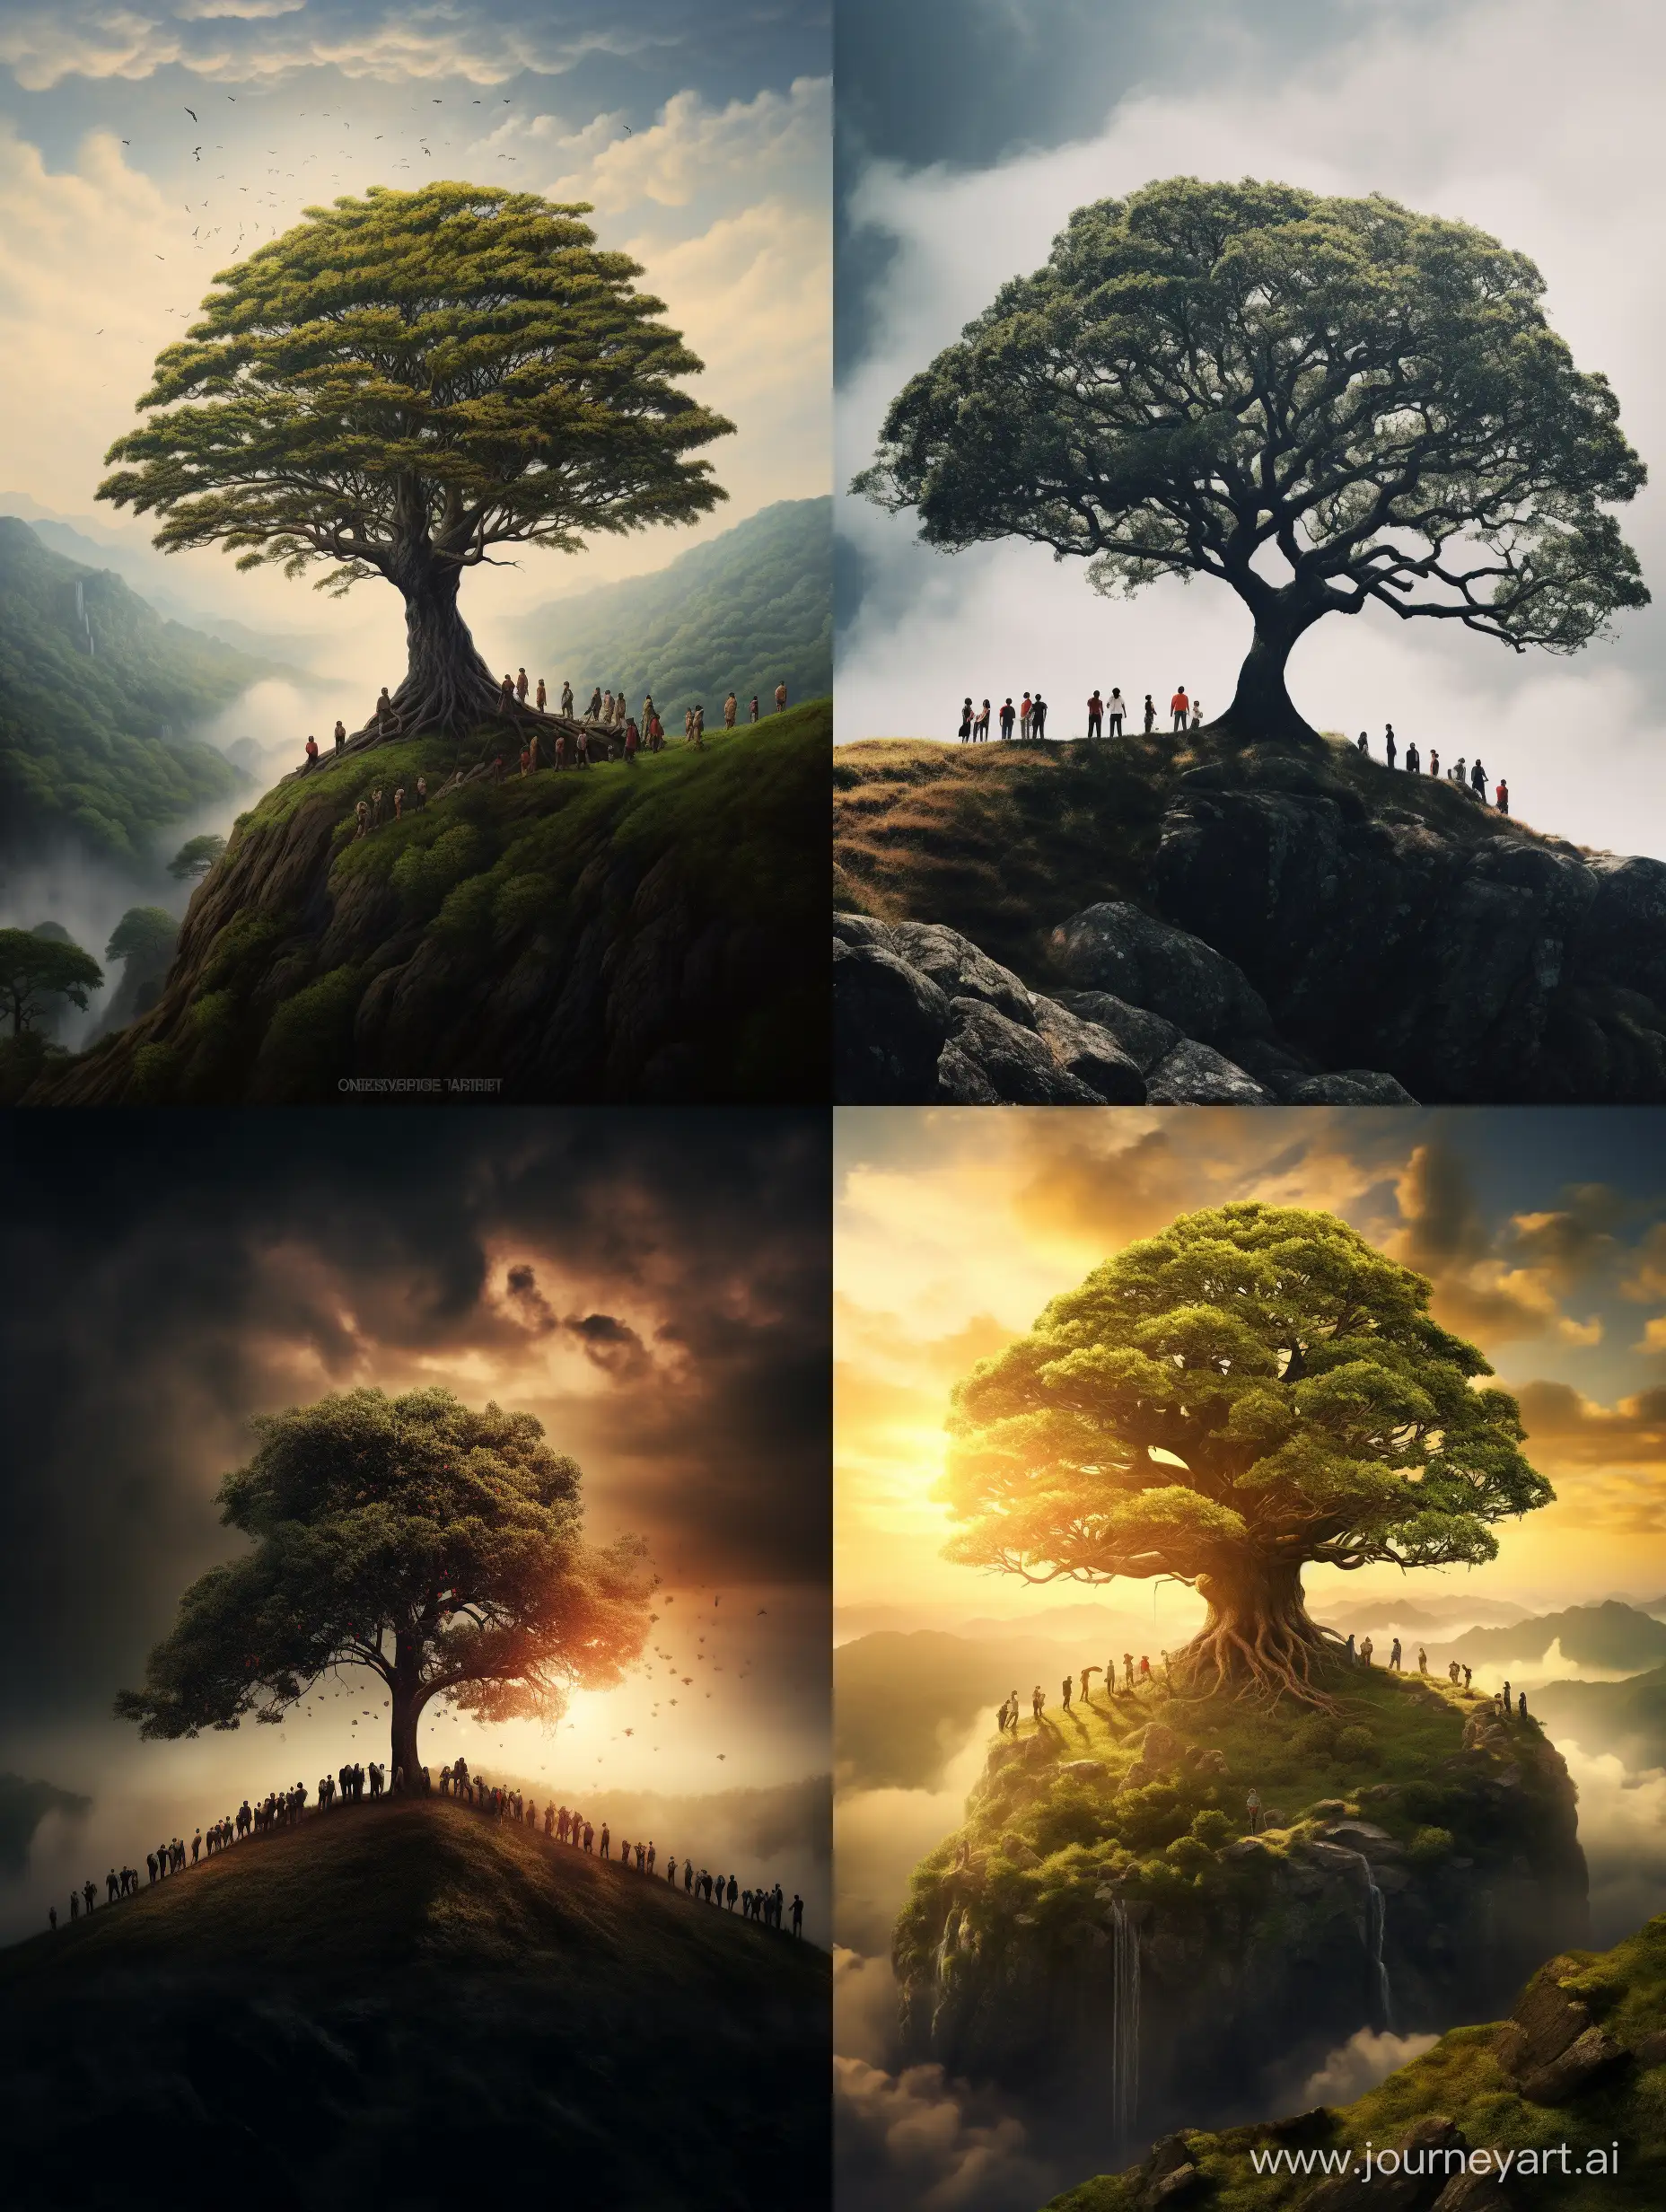 Serene-Hilltop-Gathering-with-a-Majestic-Tree-in-34-Aspect-Ratio